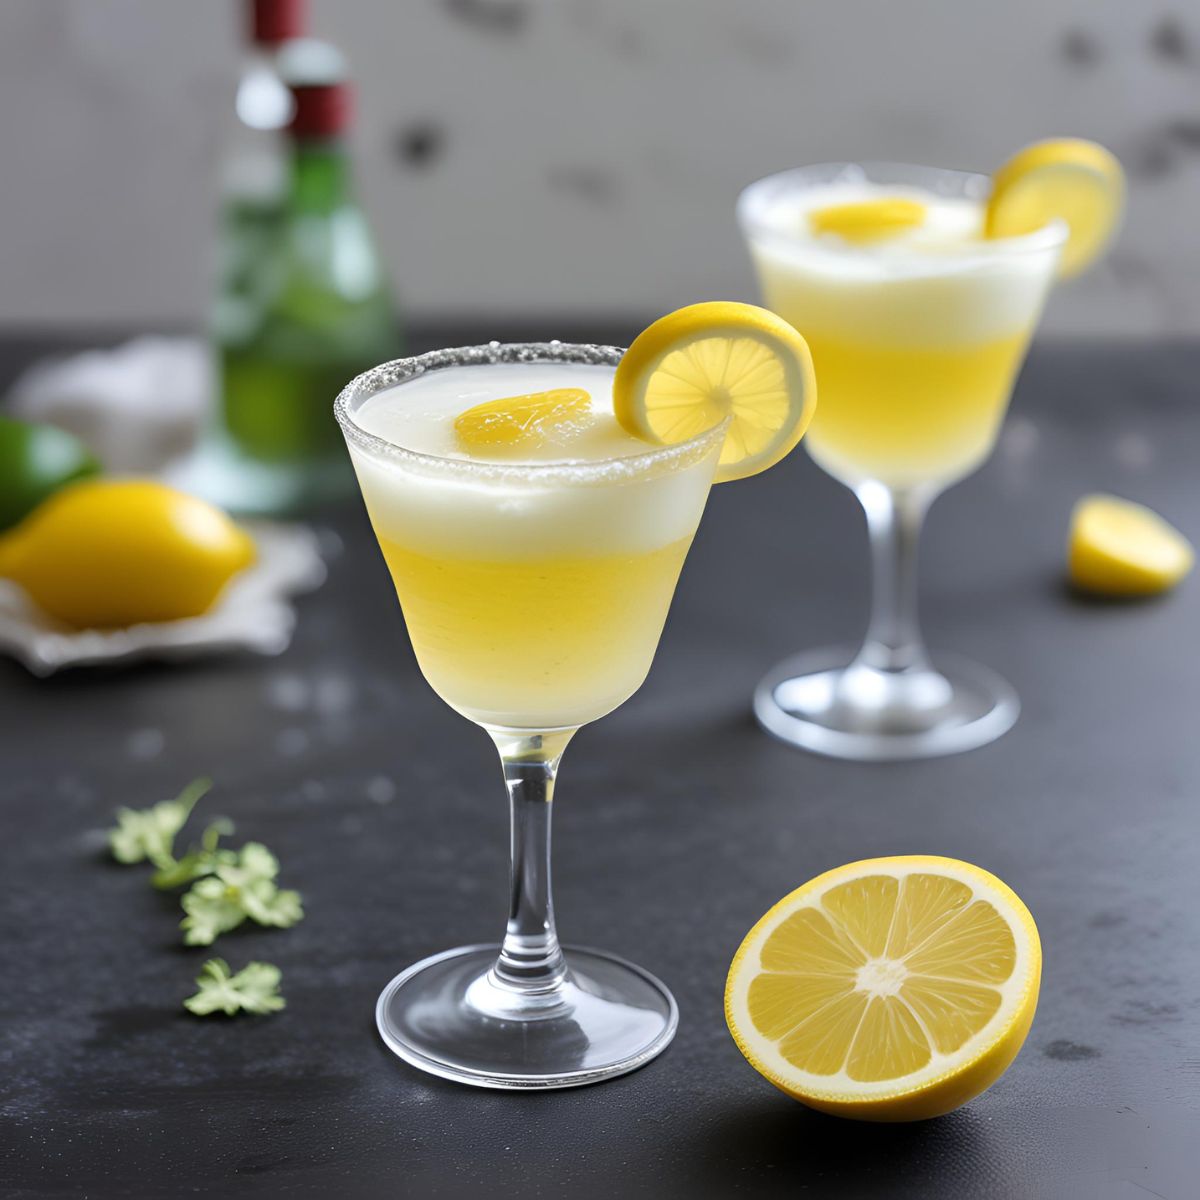 Caprioska Recipe: Simple and Refreshing!